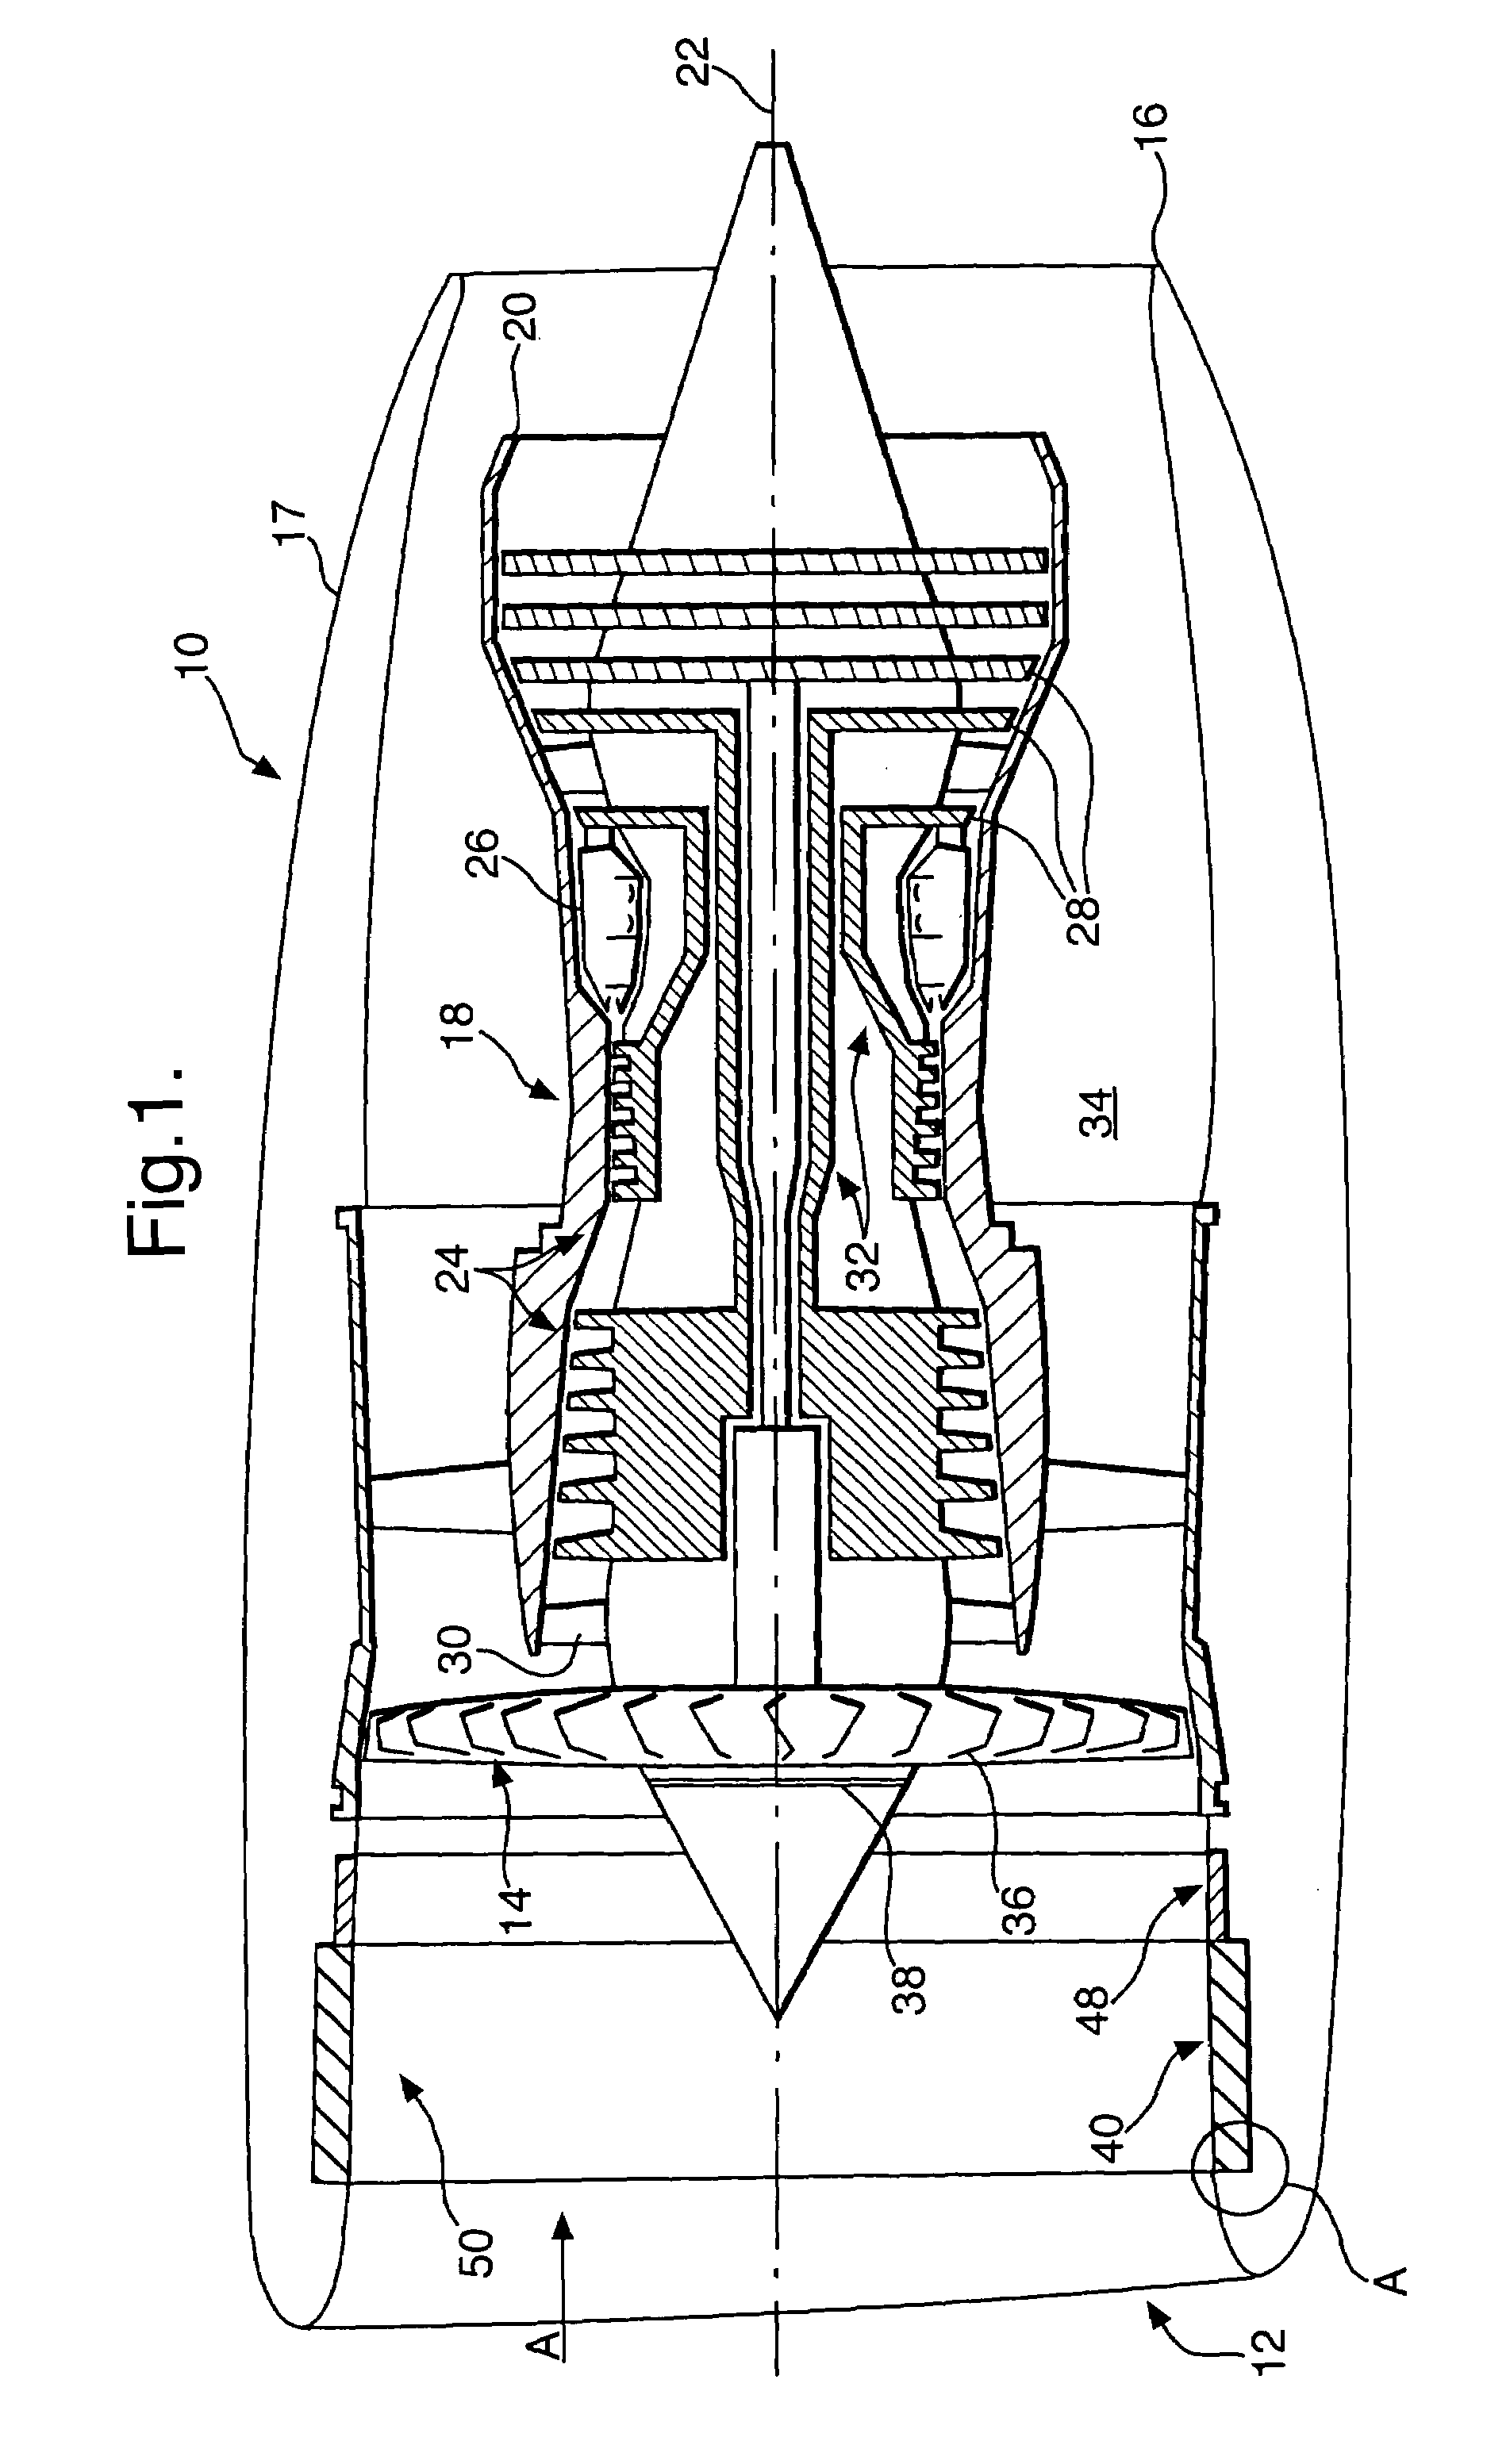 Acoustic liner for gas turbine engine